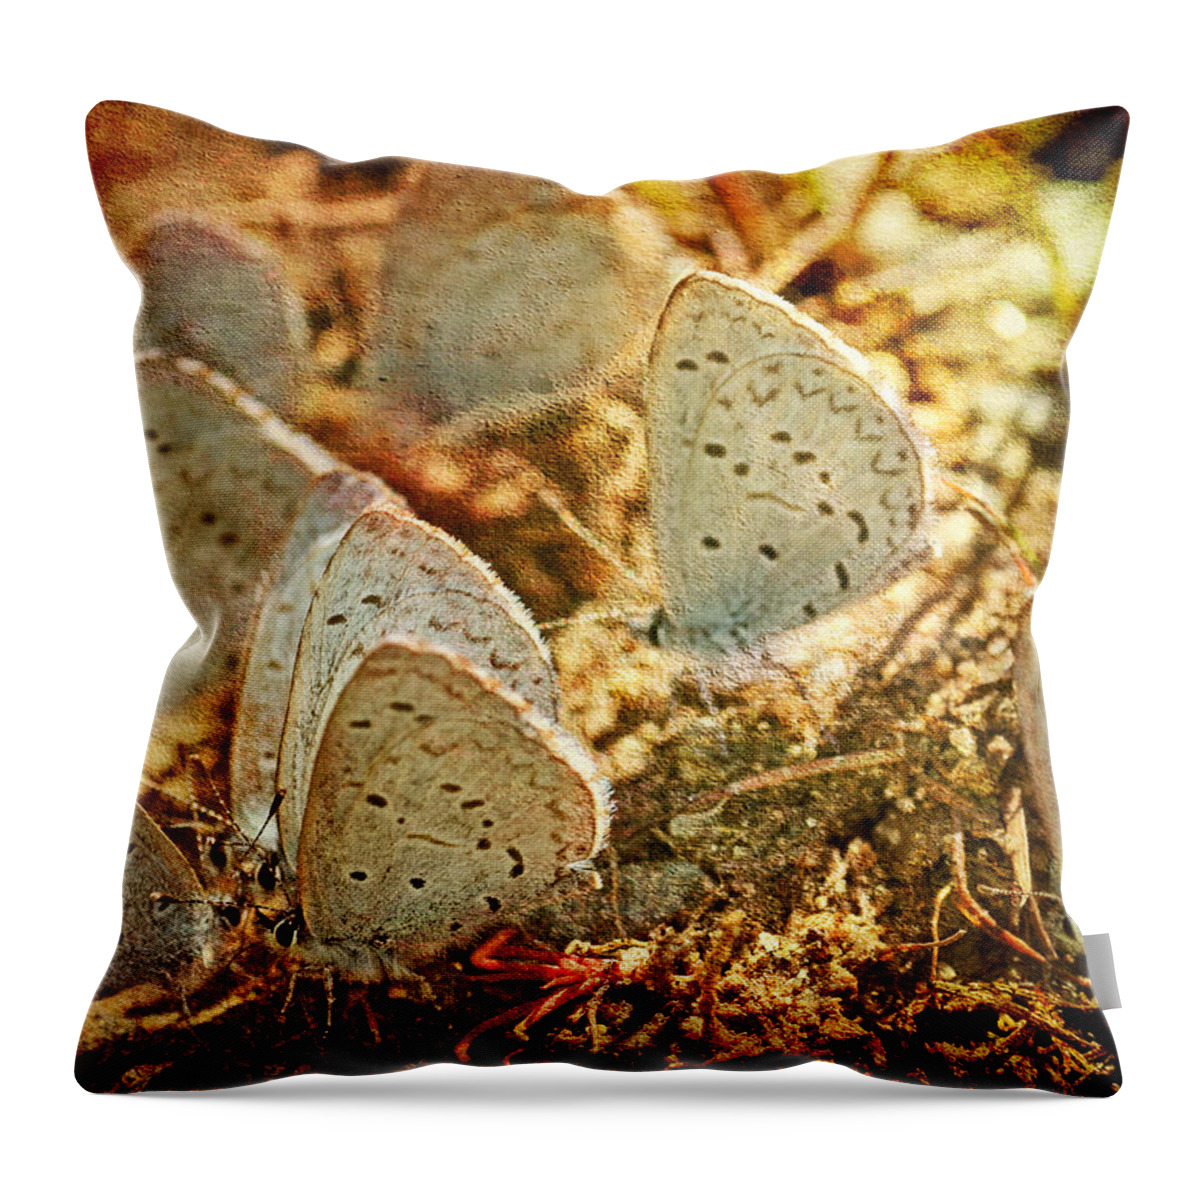 Butterflies Throw Pillow featuring the photograph Butterfly Gathering by Peggy Collins